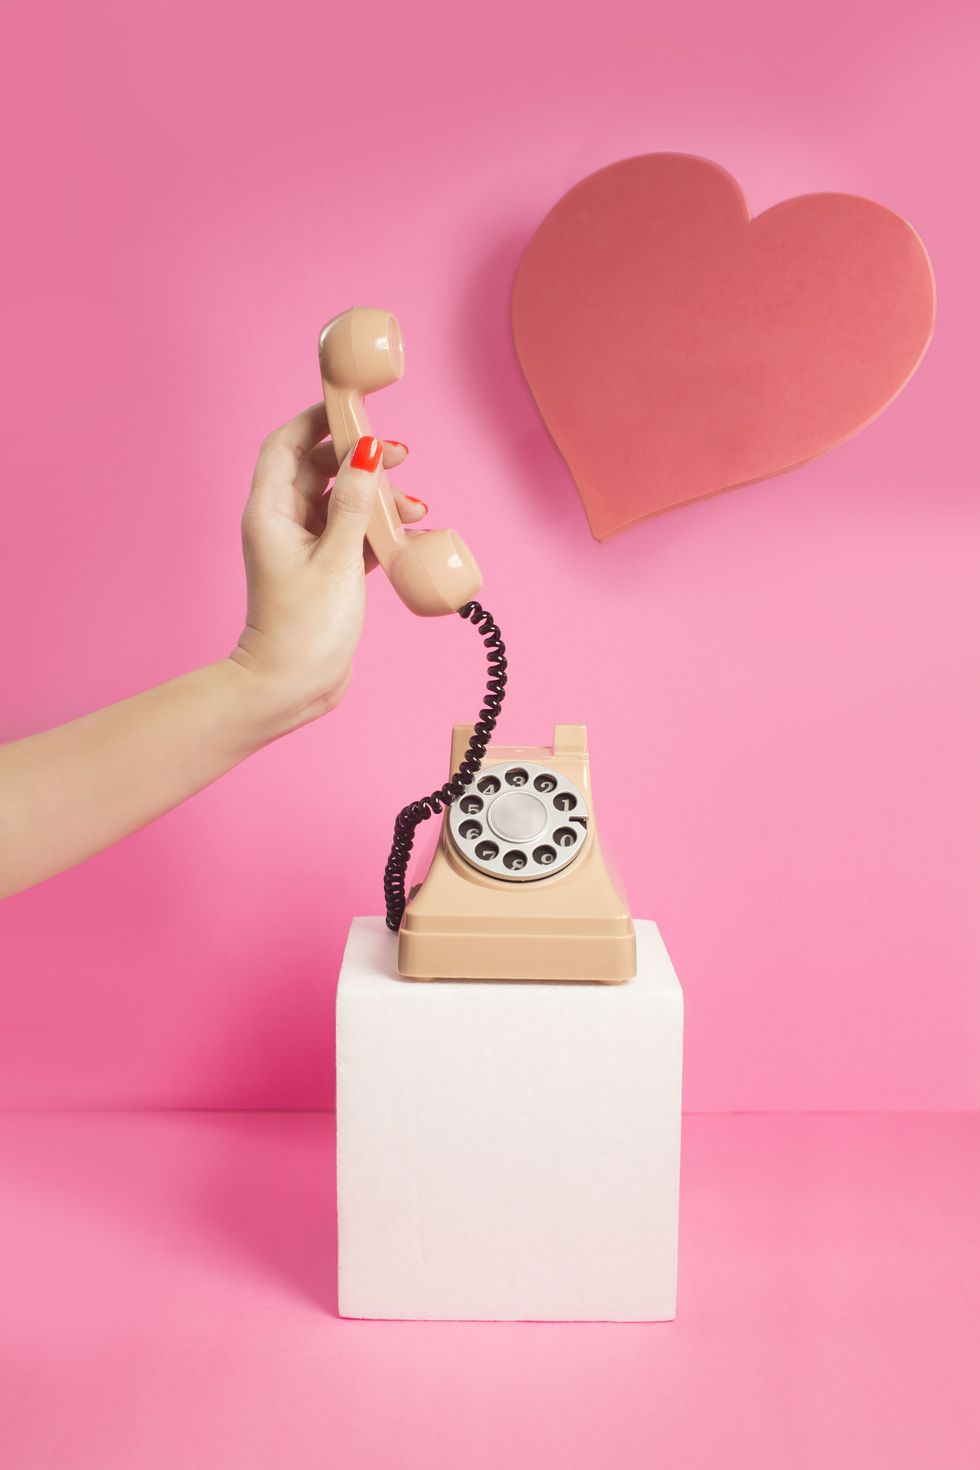 Traditional telephone on a pink background with a loveheart